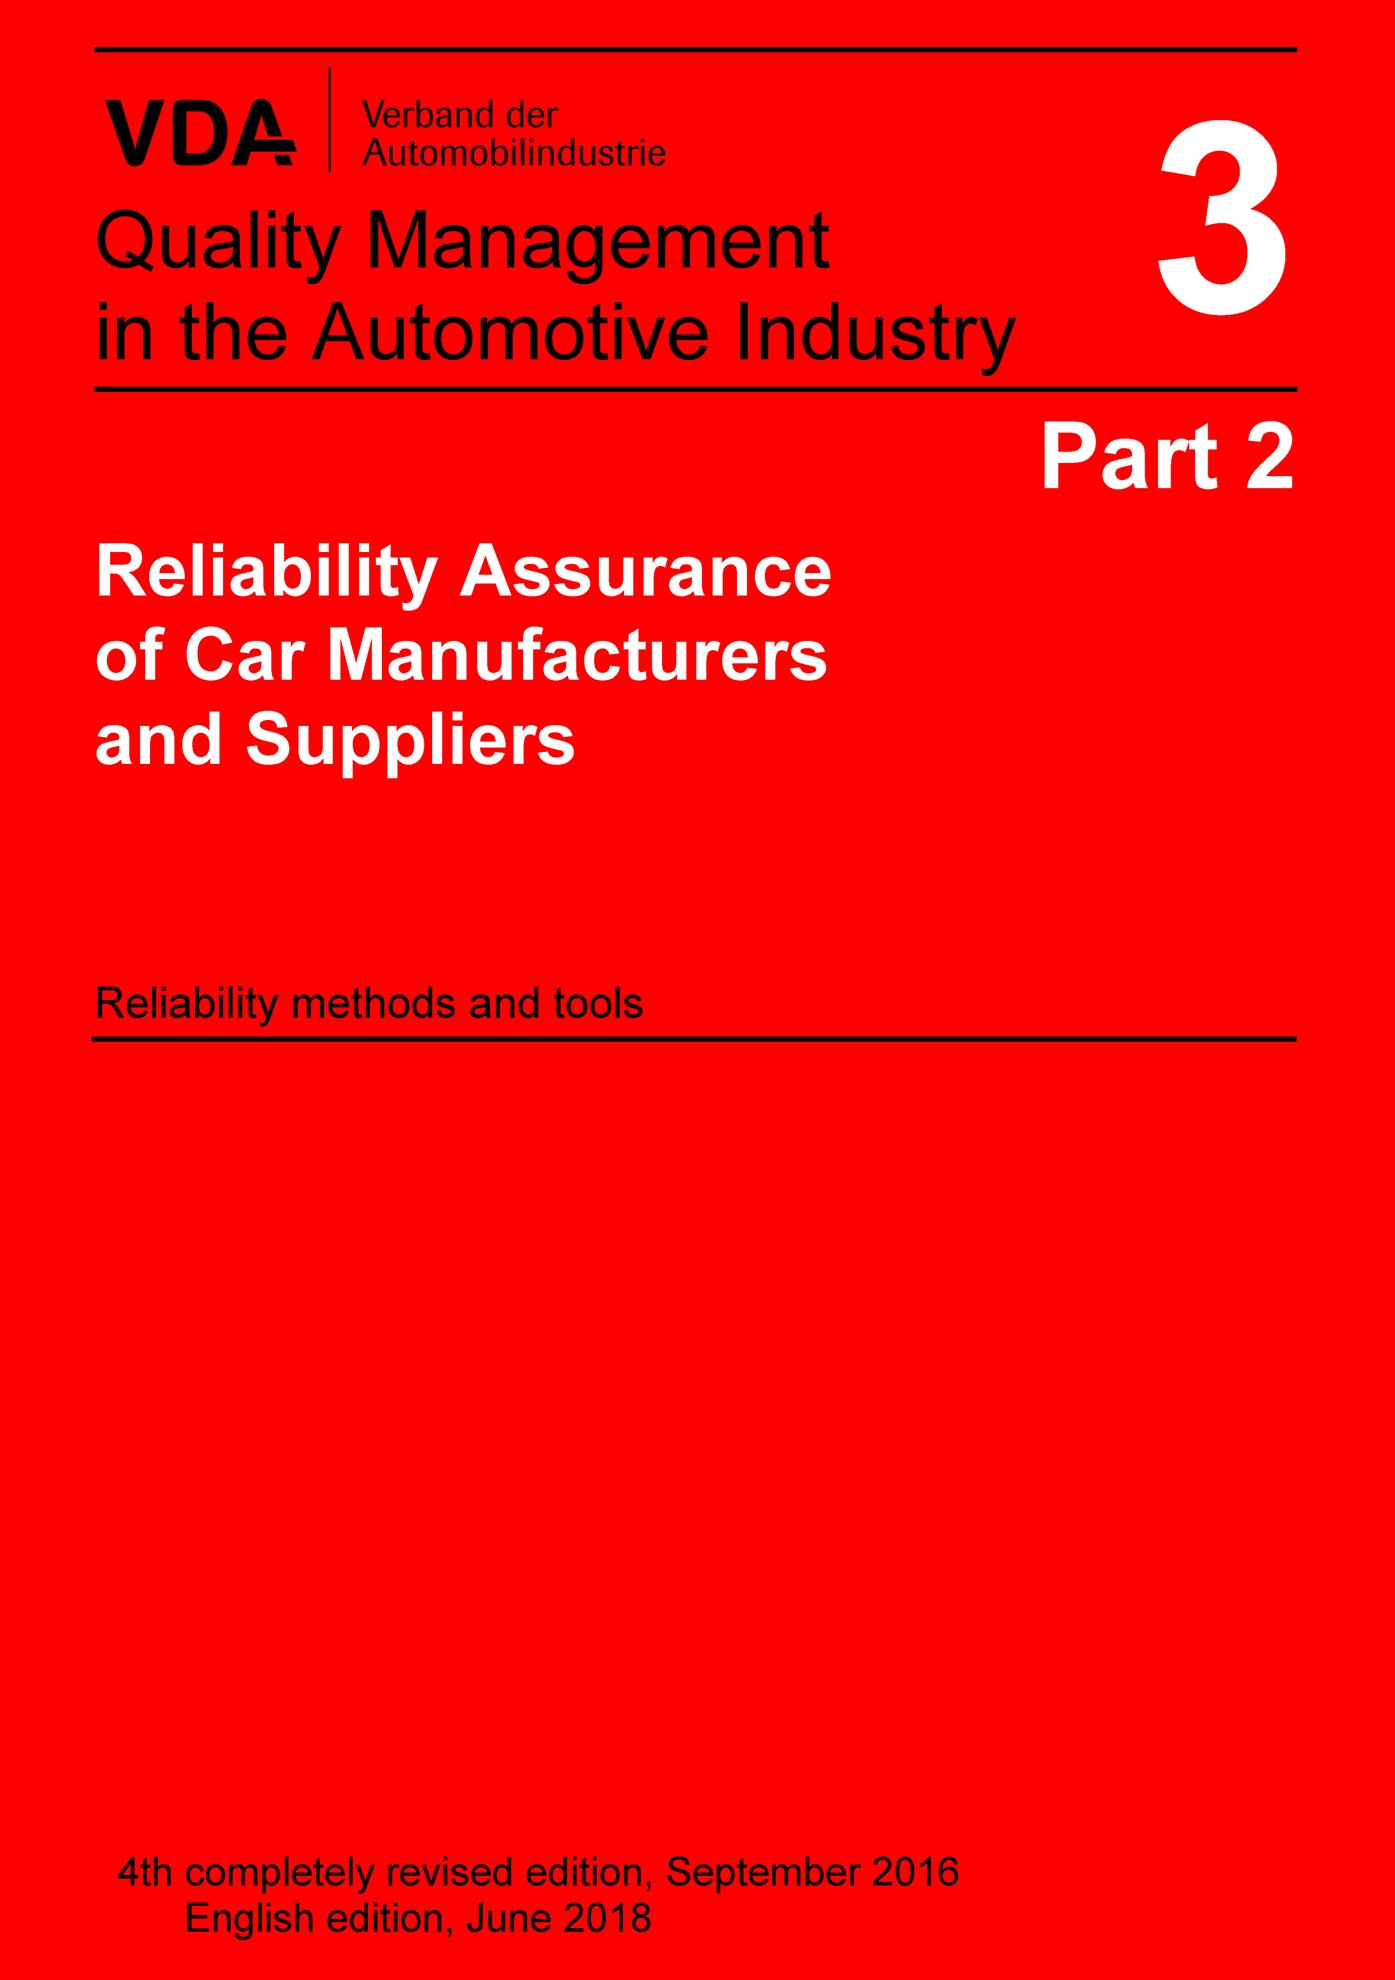 Publikácie  VDA Volume 3 Part 2, 4th completely revised edition 2016 Reliability Assurance of Car Manufacturers and Suppliers 
 Reliability methods and tools 1.1.2016 náhľad